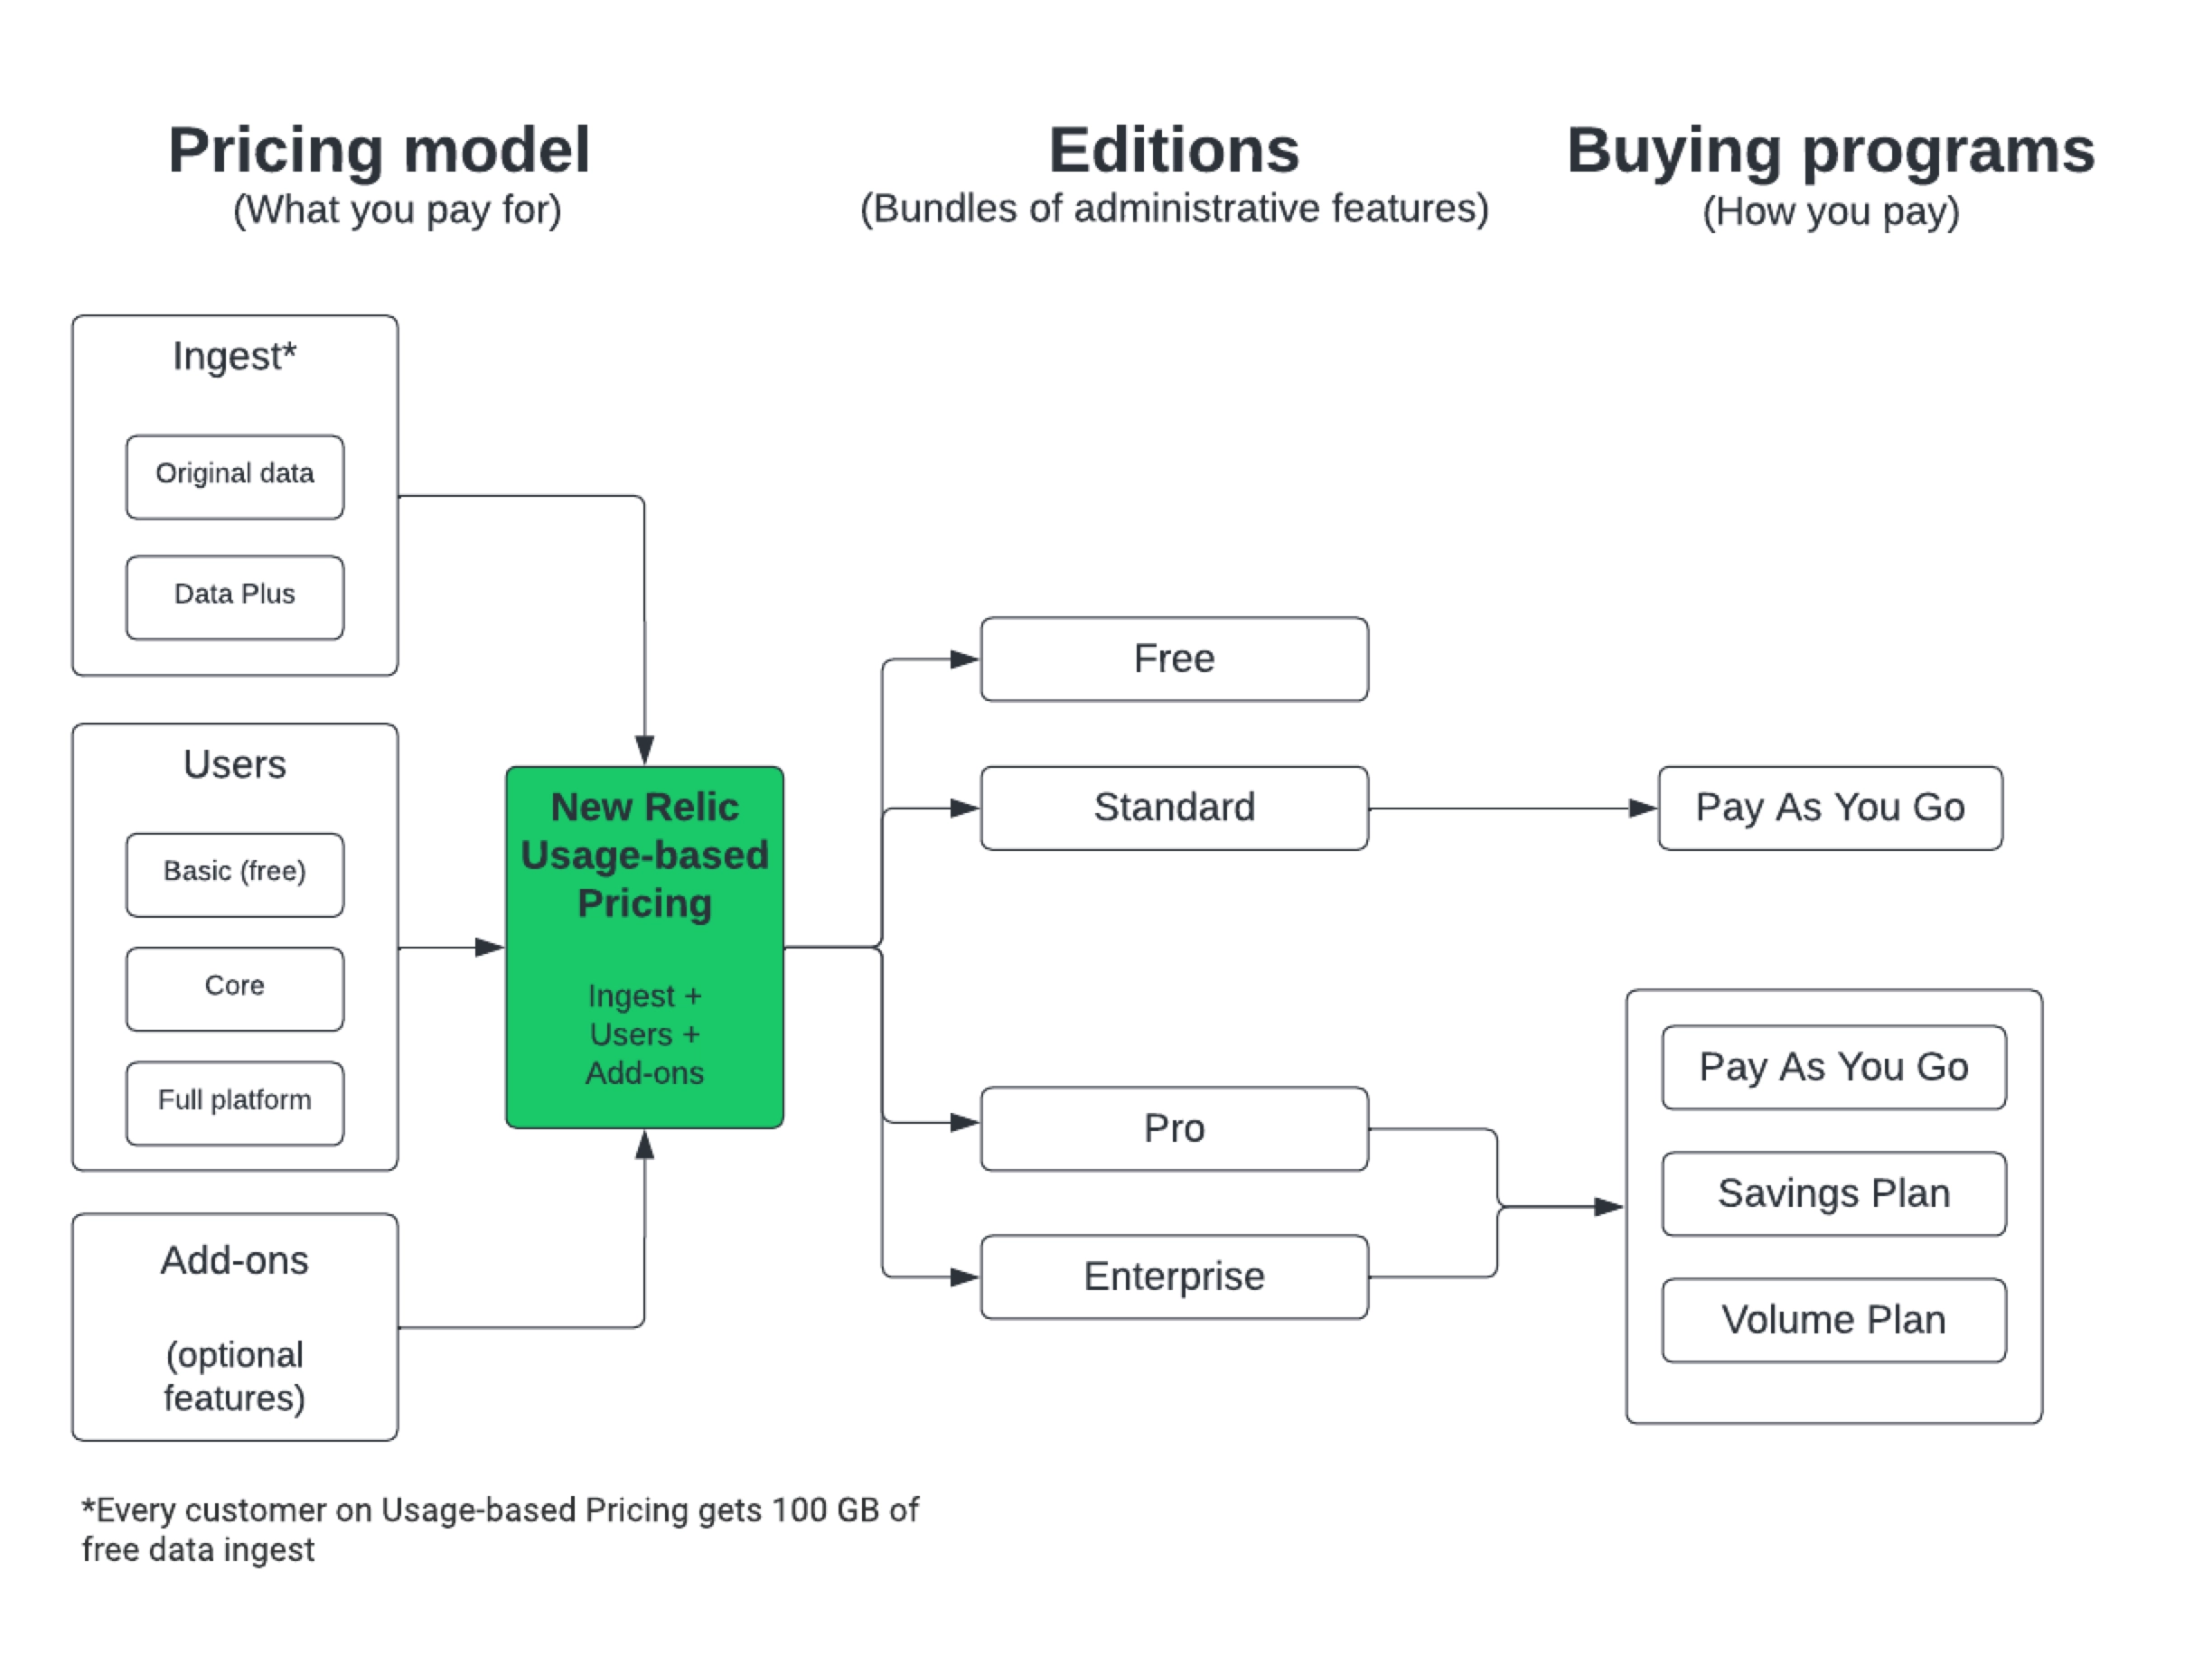 Diagram showing the pricing model, editions, and buying programs